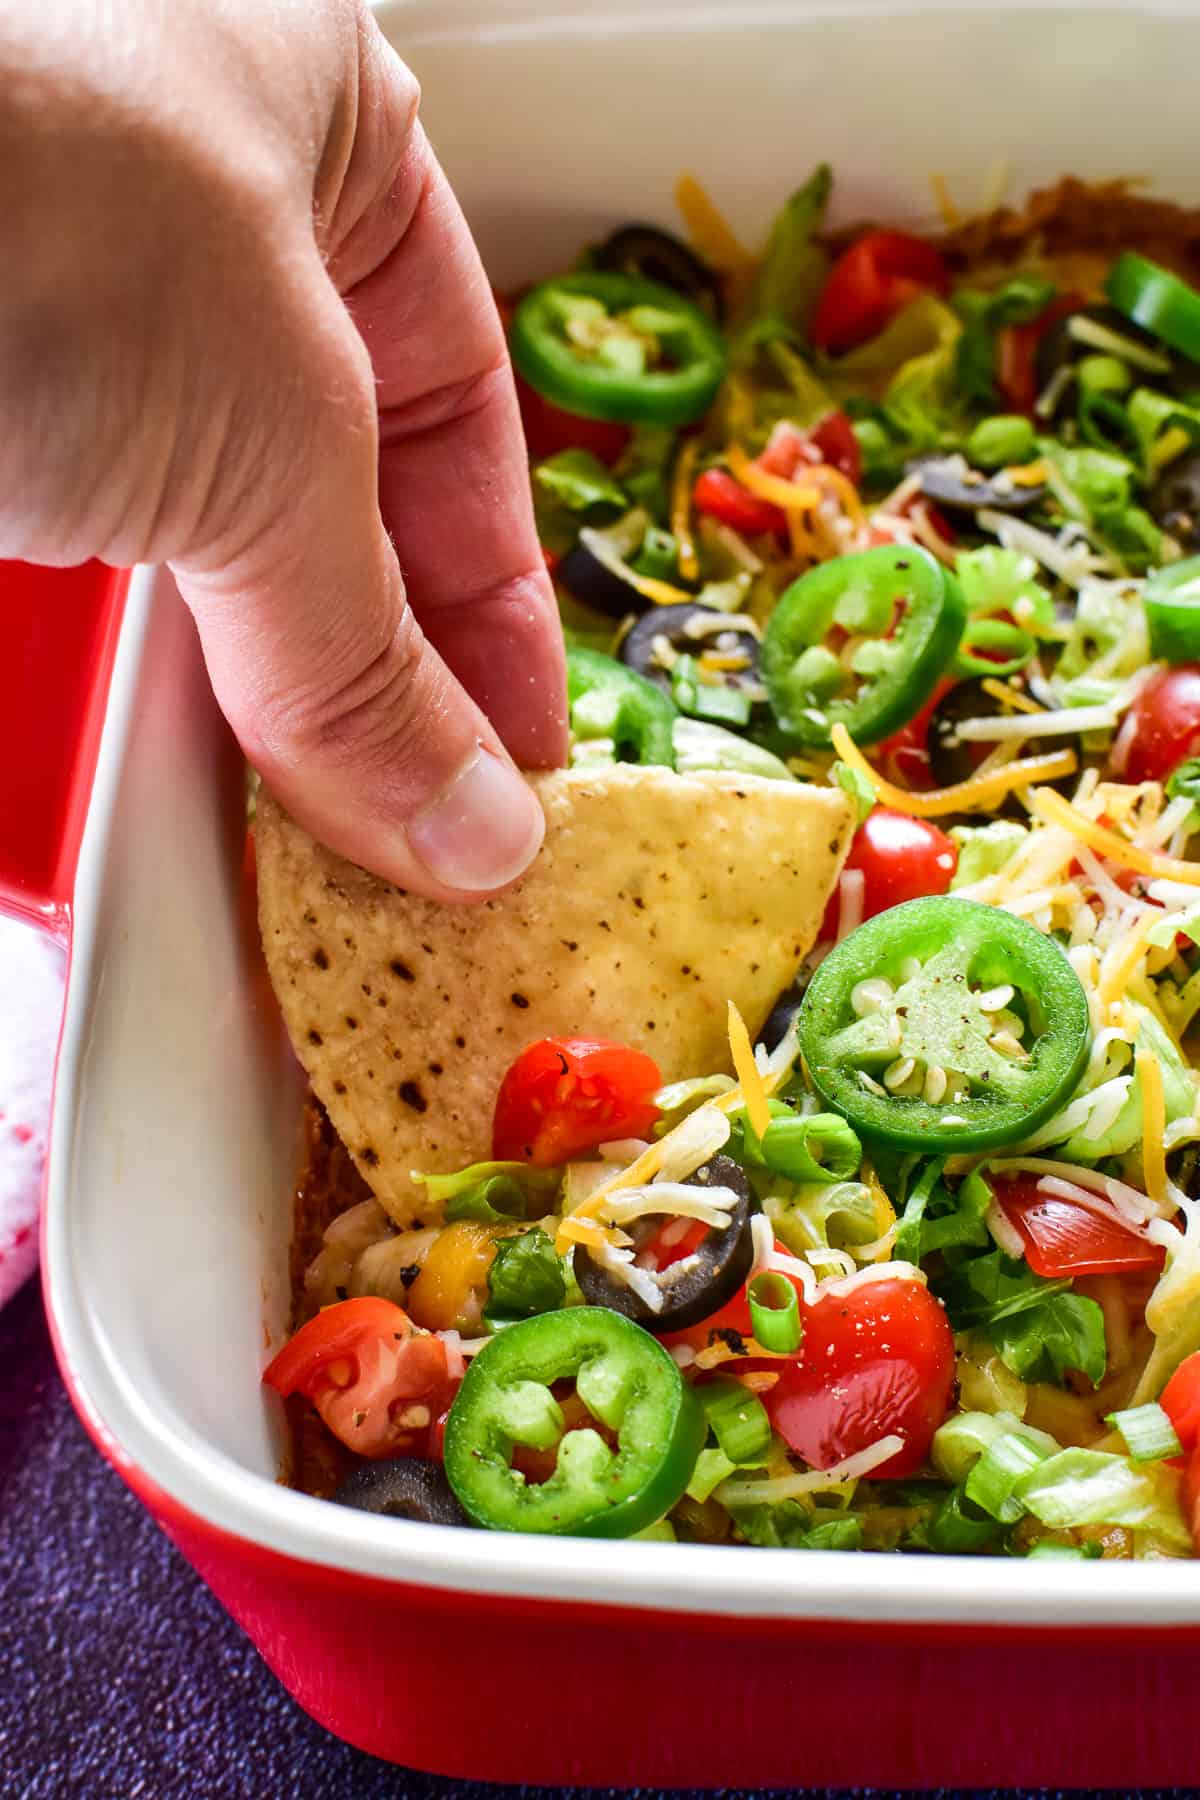 Hand dipping chip into taco dip